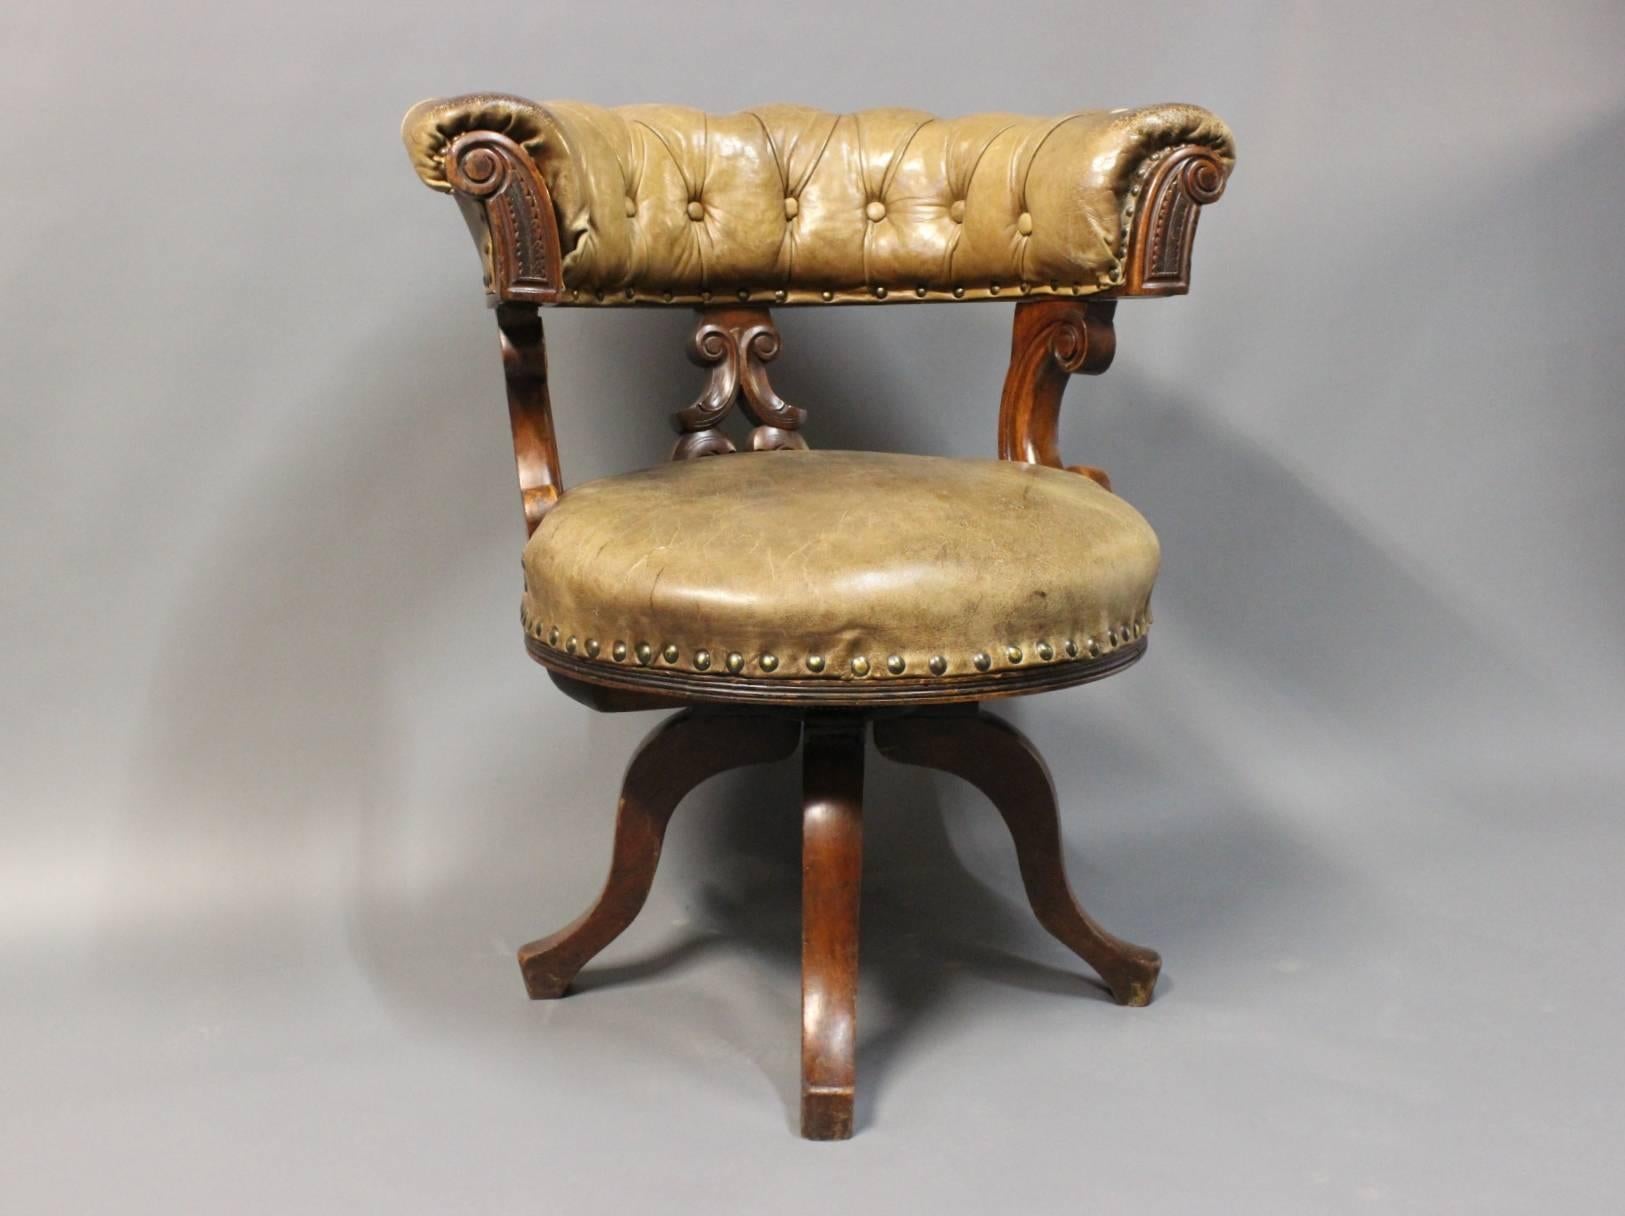 Office chair in mahogany and in golden brown original patinated leather. The chair has been upholstered with brass nails and is rotatable. The chair is from England and circa 1880.